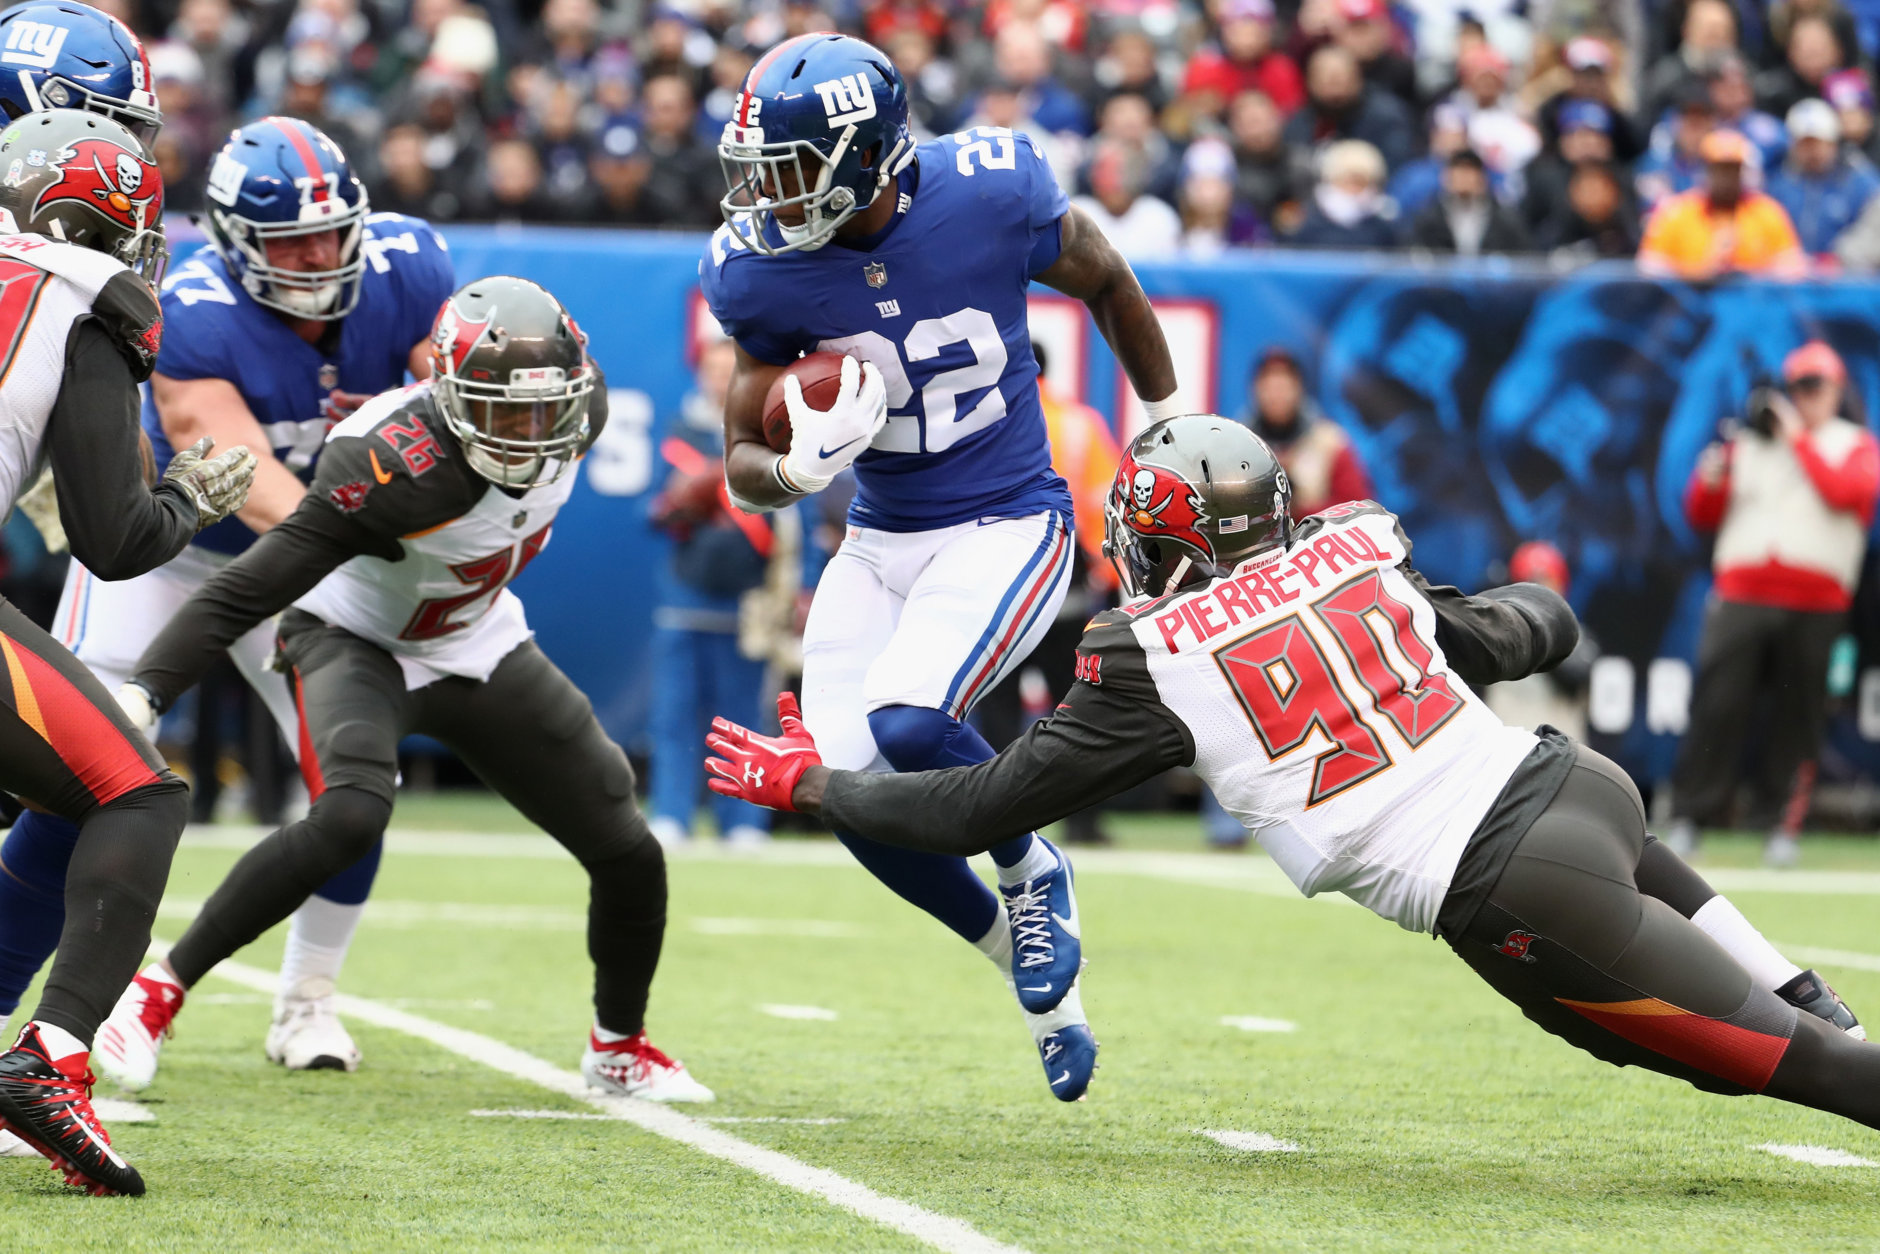 EAST RUTHERFORD, NJ - NOVEMBER 18:  Running back Wayne Gallman #22 of the New York Giants carries the ball against defensive end Jason Pierre-Paul #90 of the Tampa Bay Buccaneers in the second quarter at MetLife Stadium on November 18, 2018 in East Rutherford, New Jersey.  (Photo by Al Bello/Getty Images)